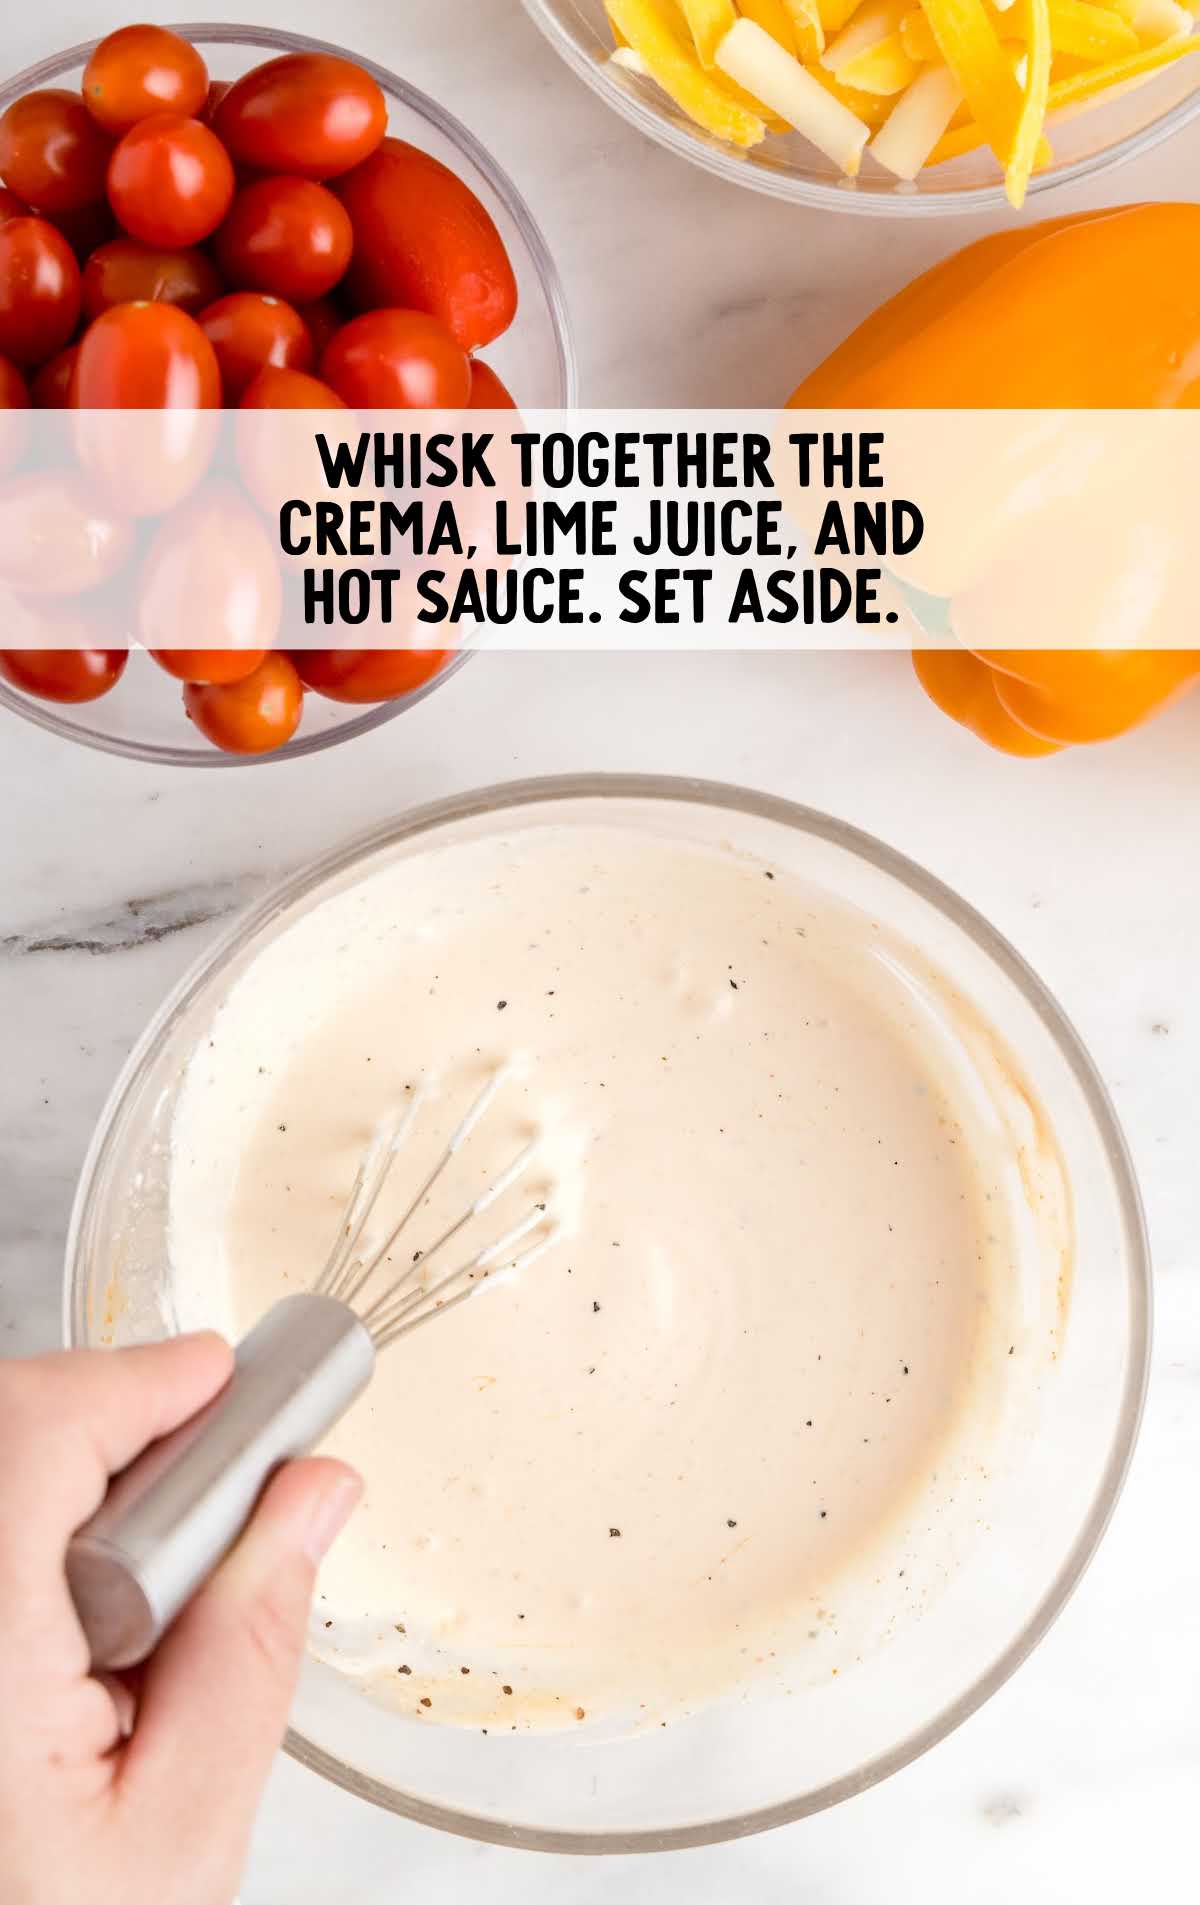 crema, lime juice and hot sauce dressing whisked together in a bowl